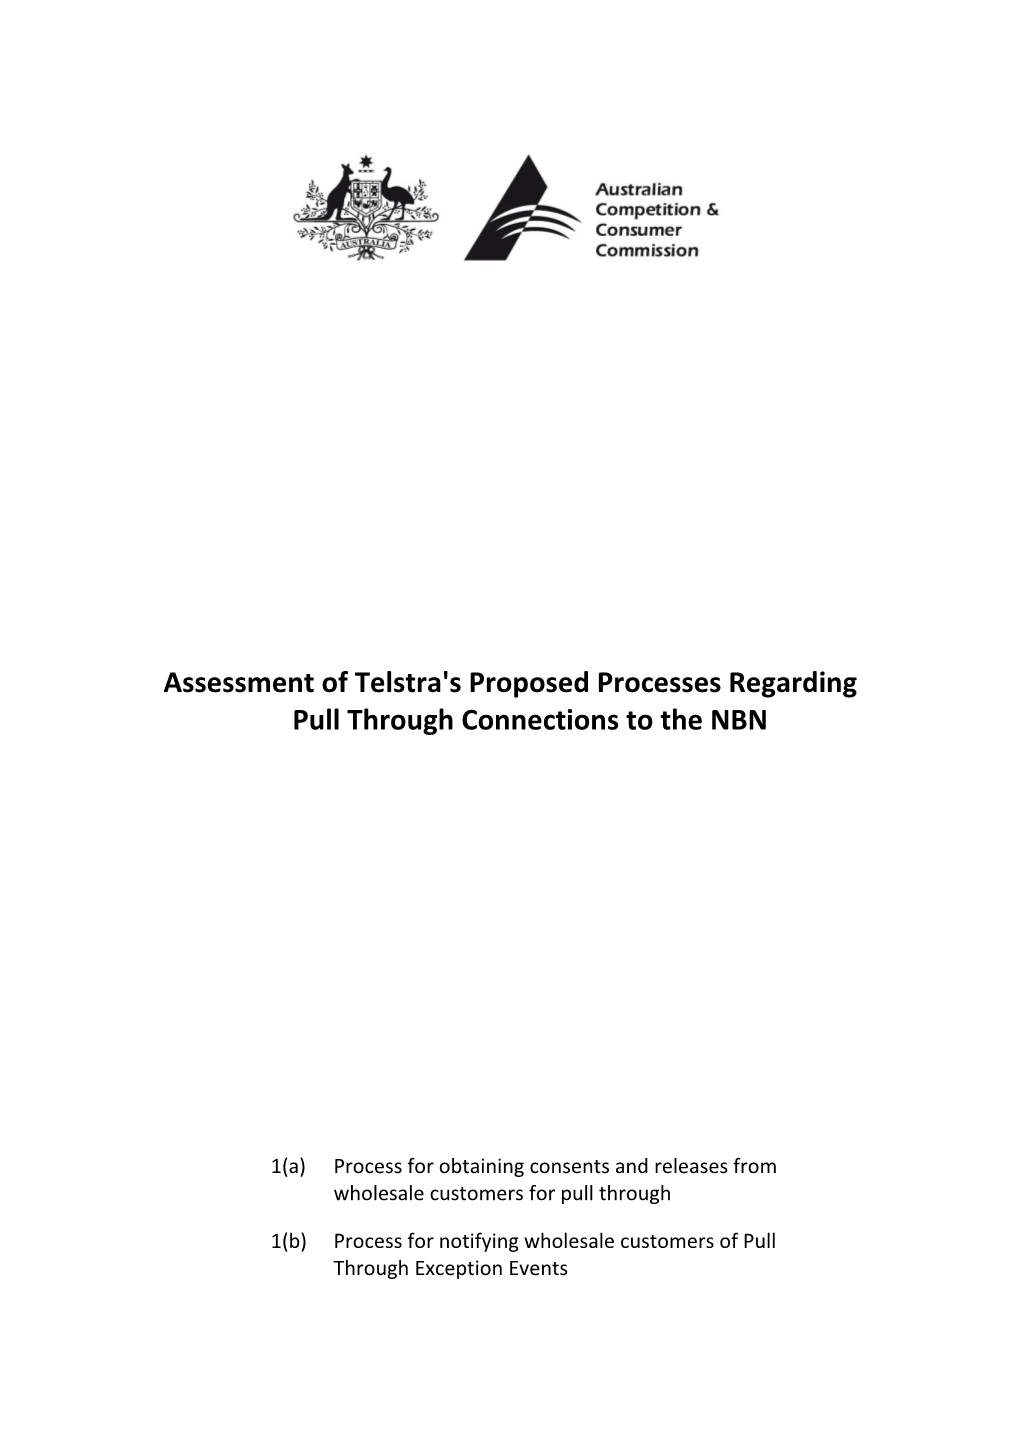 Assessment of Telstra's Proposed Processes Regarding Pull Through Connections to the NBN